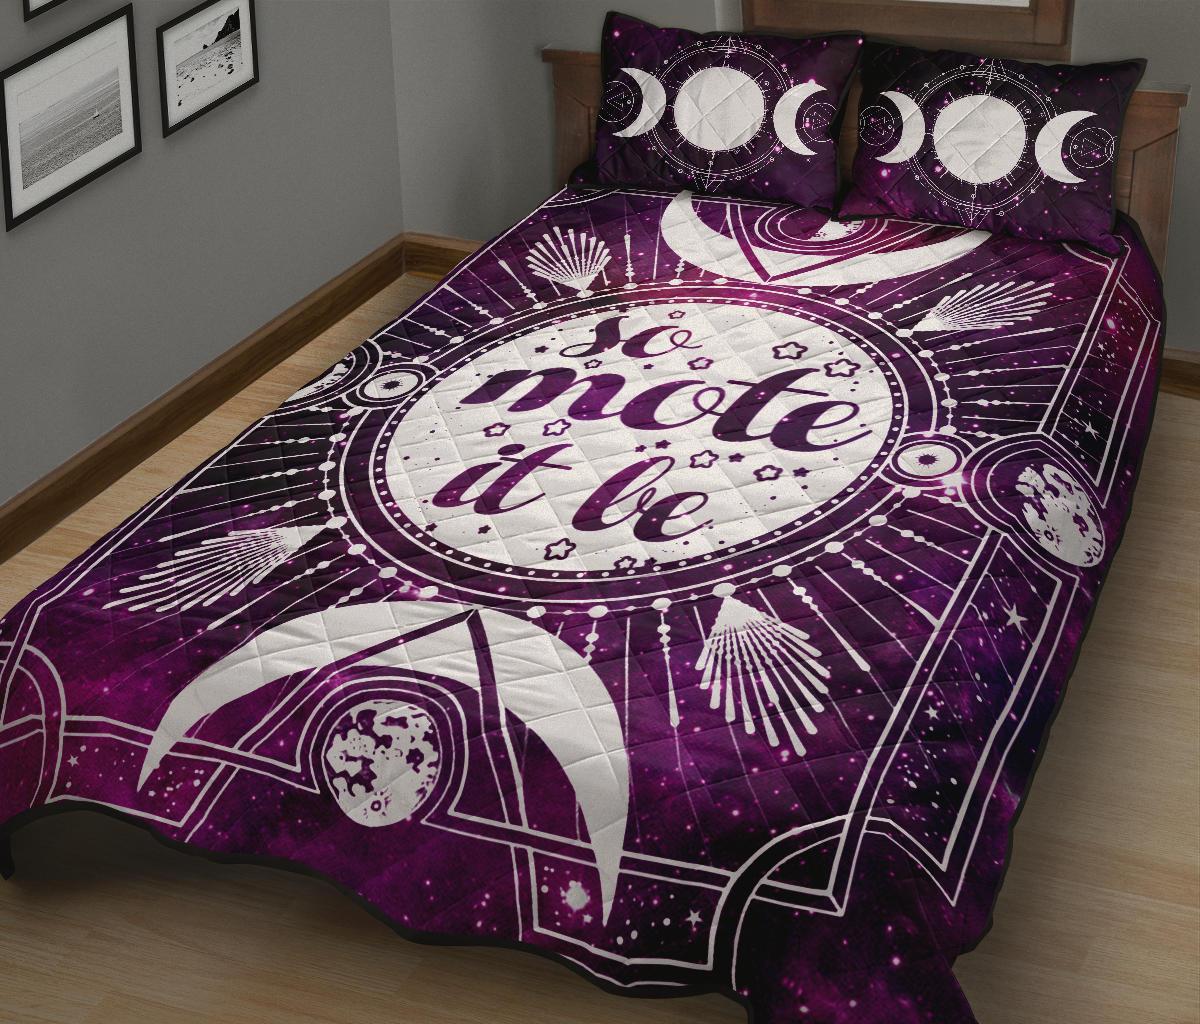 So Mote It Be Wicca - Witch Quilt Set 0822